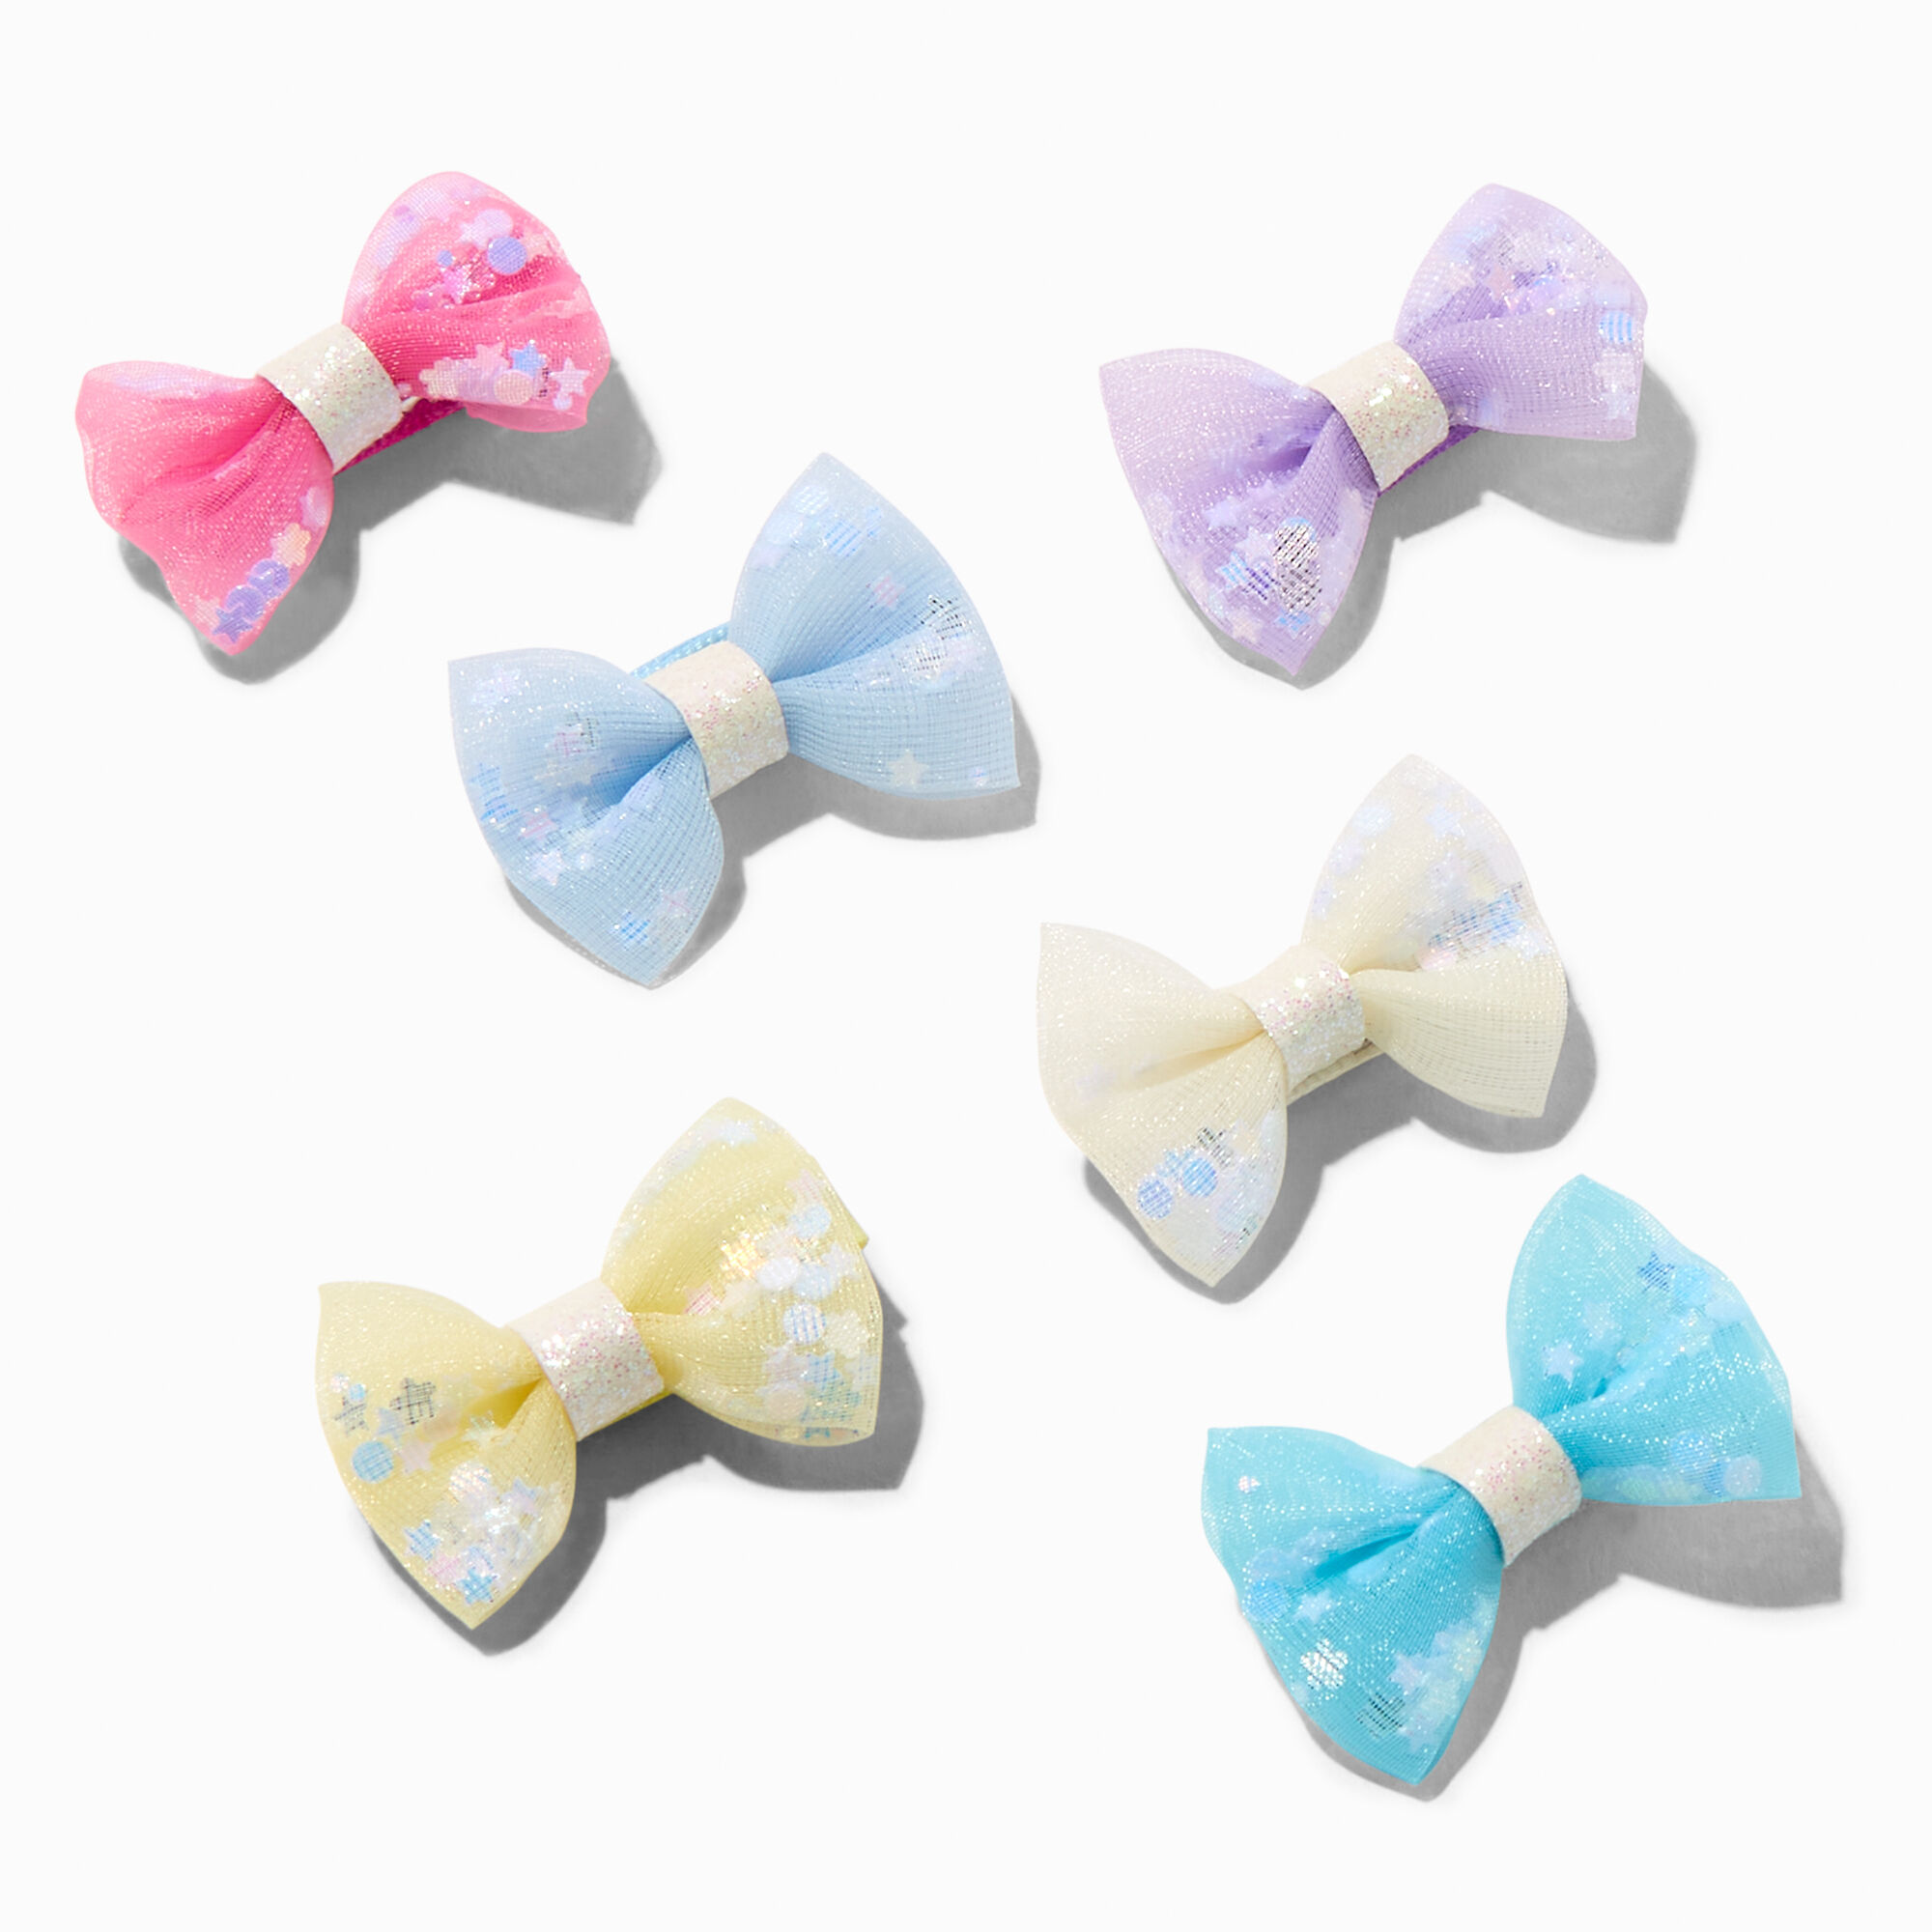 claire's club pastel star sequin hair bow clips (6 pack)